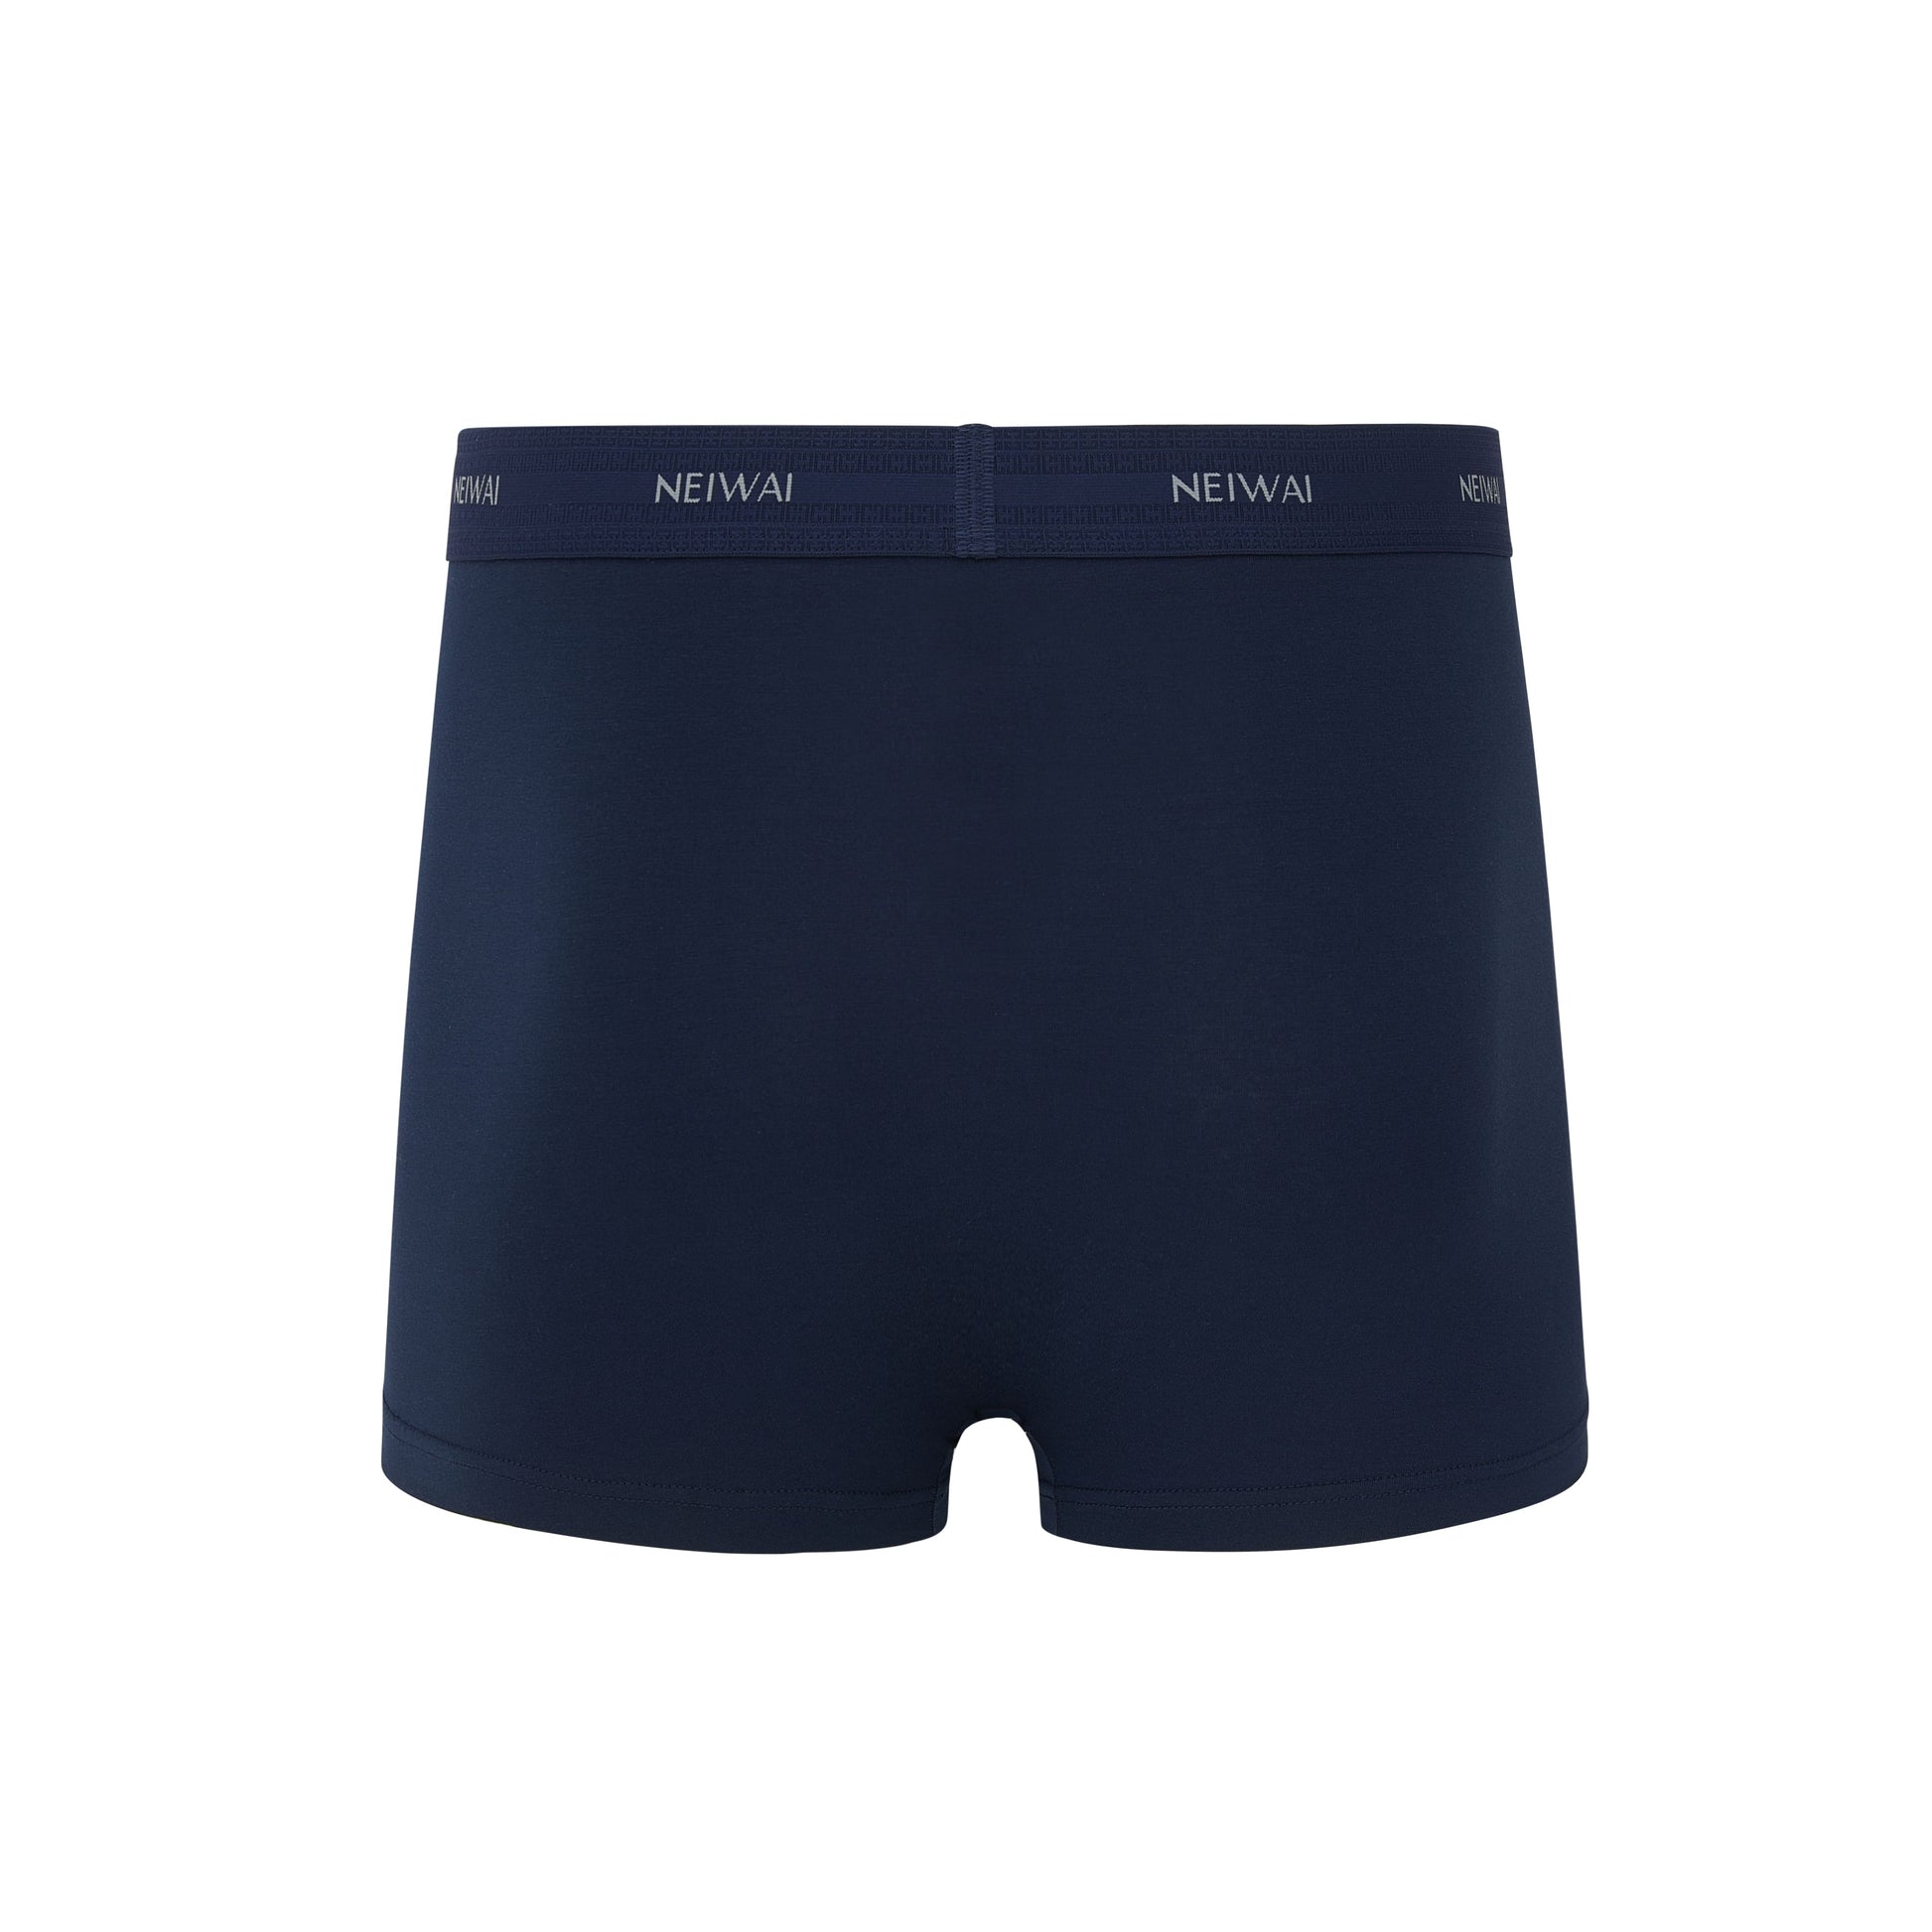 back of the Men’s Cotton Boxer Brief in navy